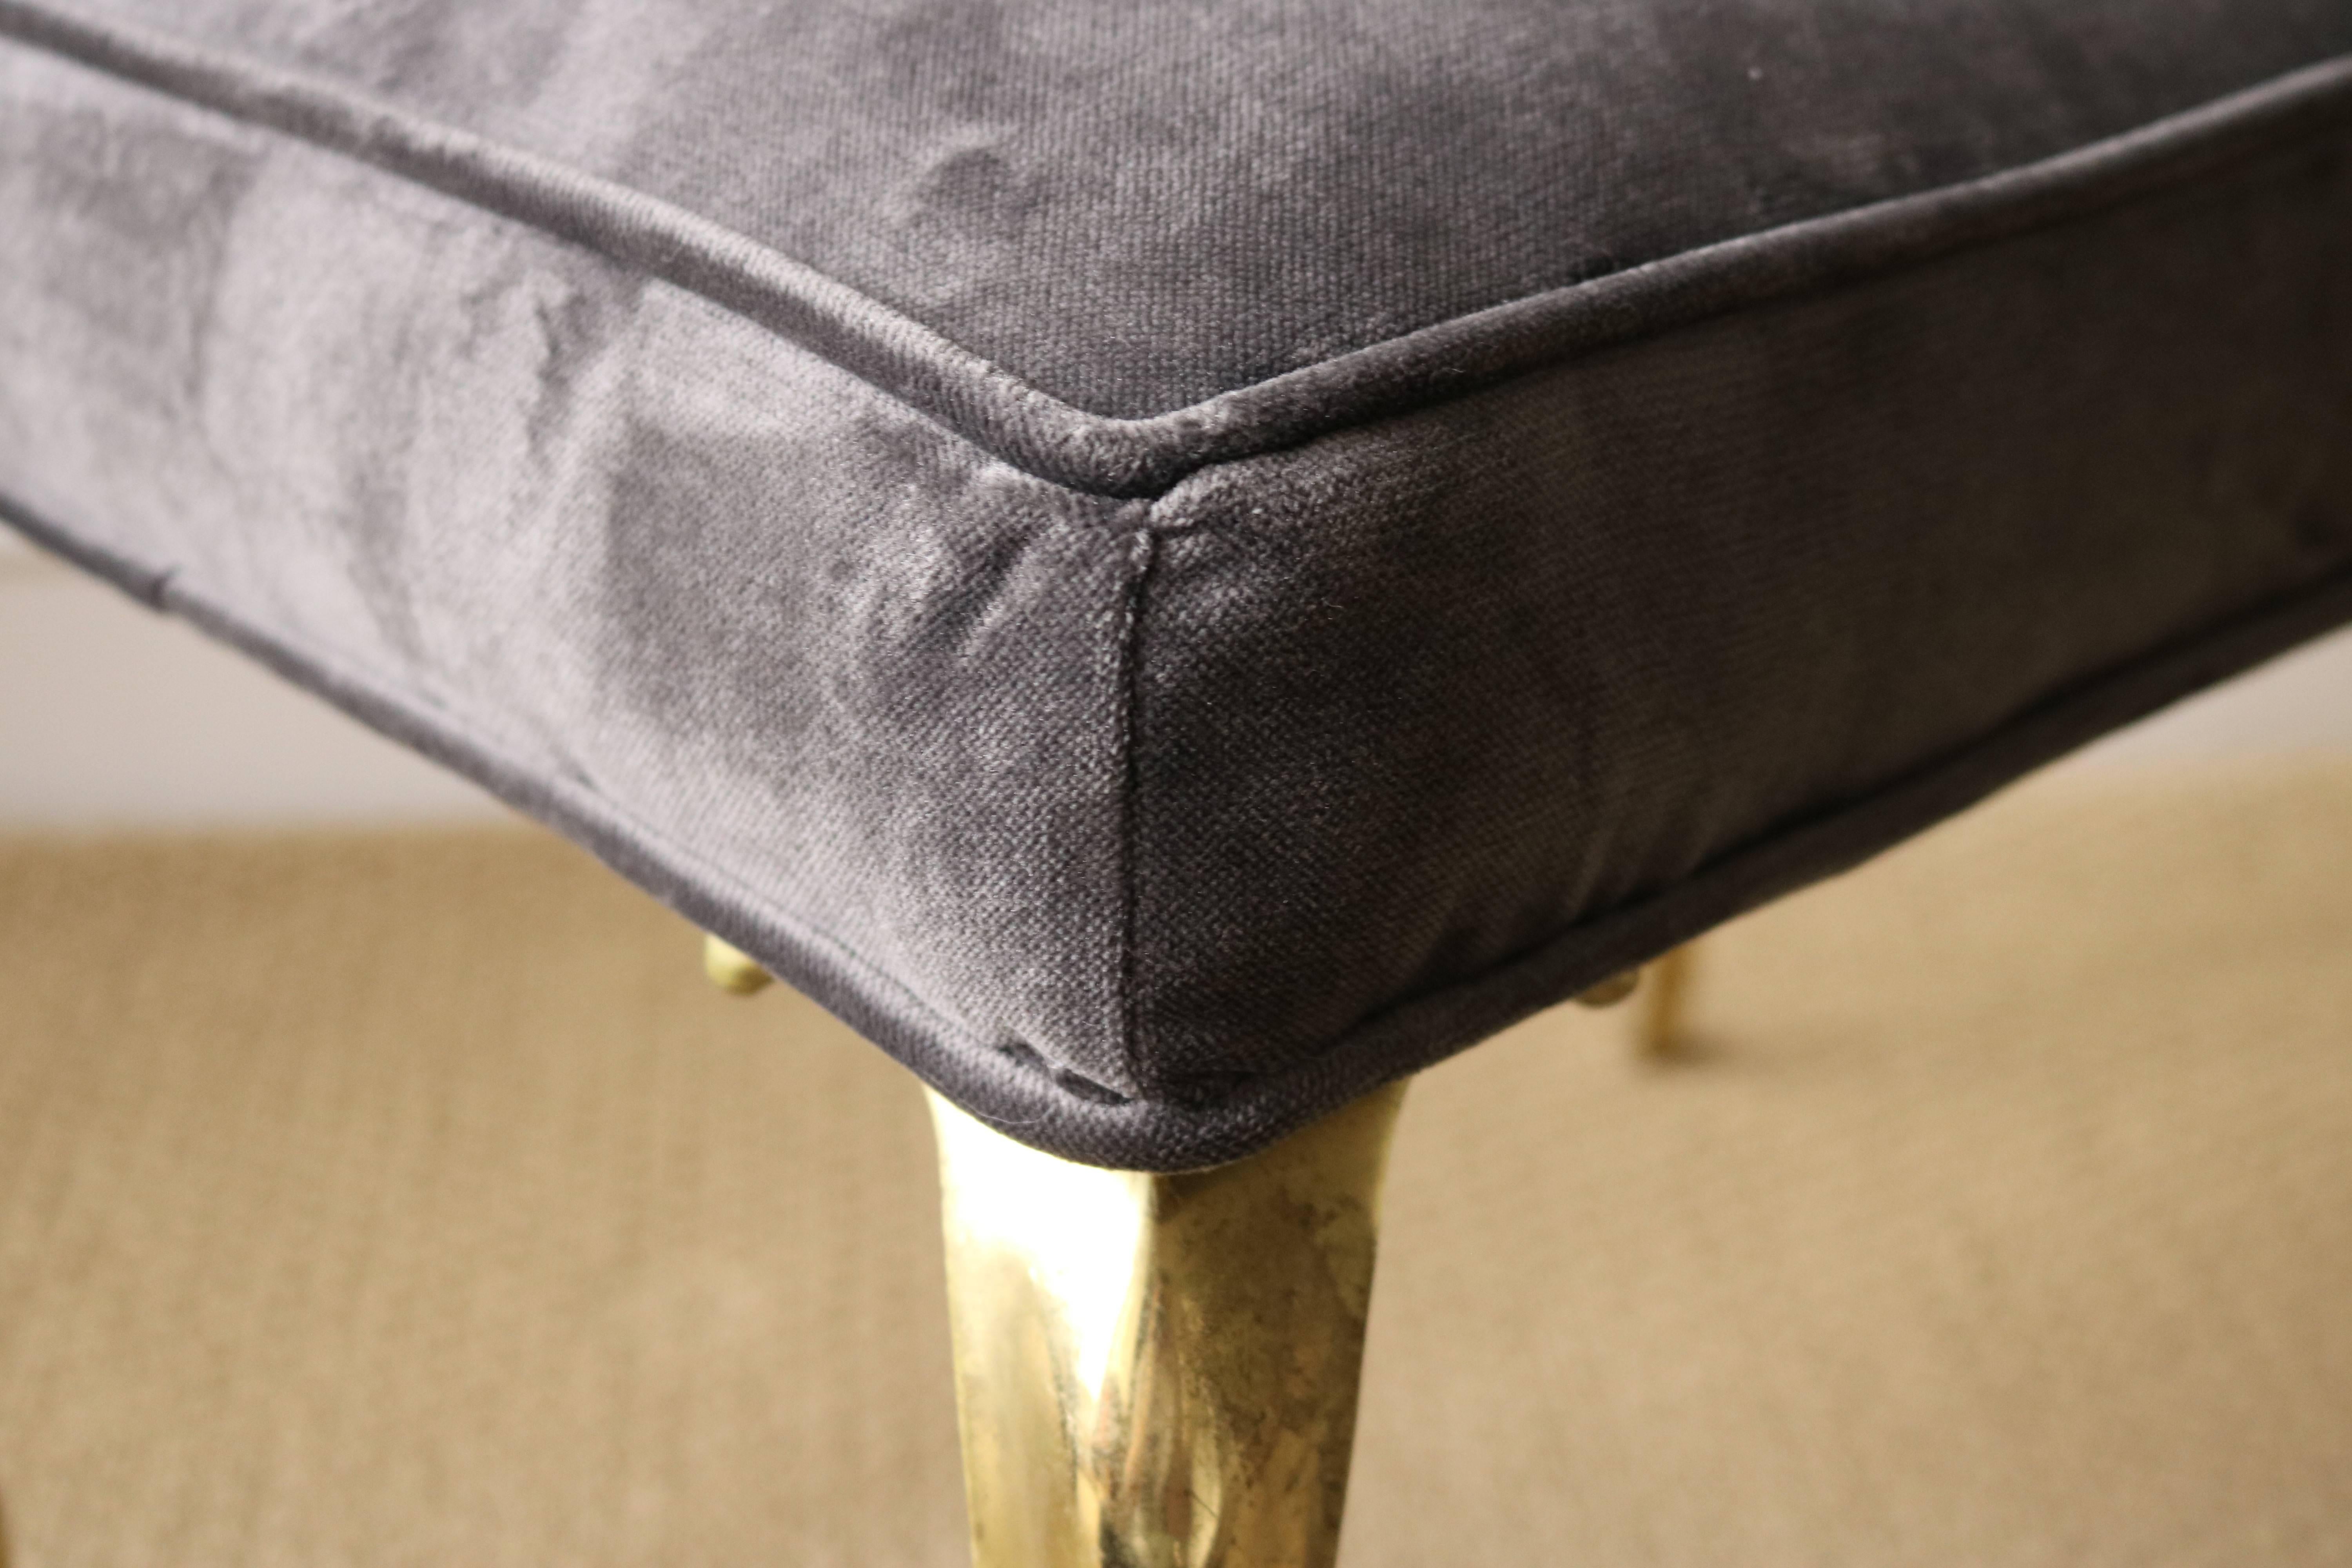 Lovely, sculptural brass legs adorn this lovely ottoman. Freshly upholstered in a luxurious velvet, this lovely piece is sure to add charm to any setting! Brass legs have the patina of age and love.